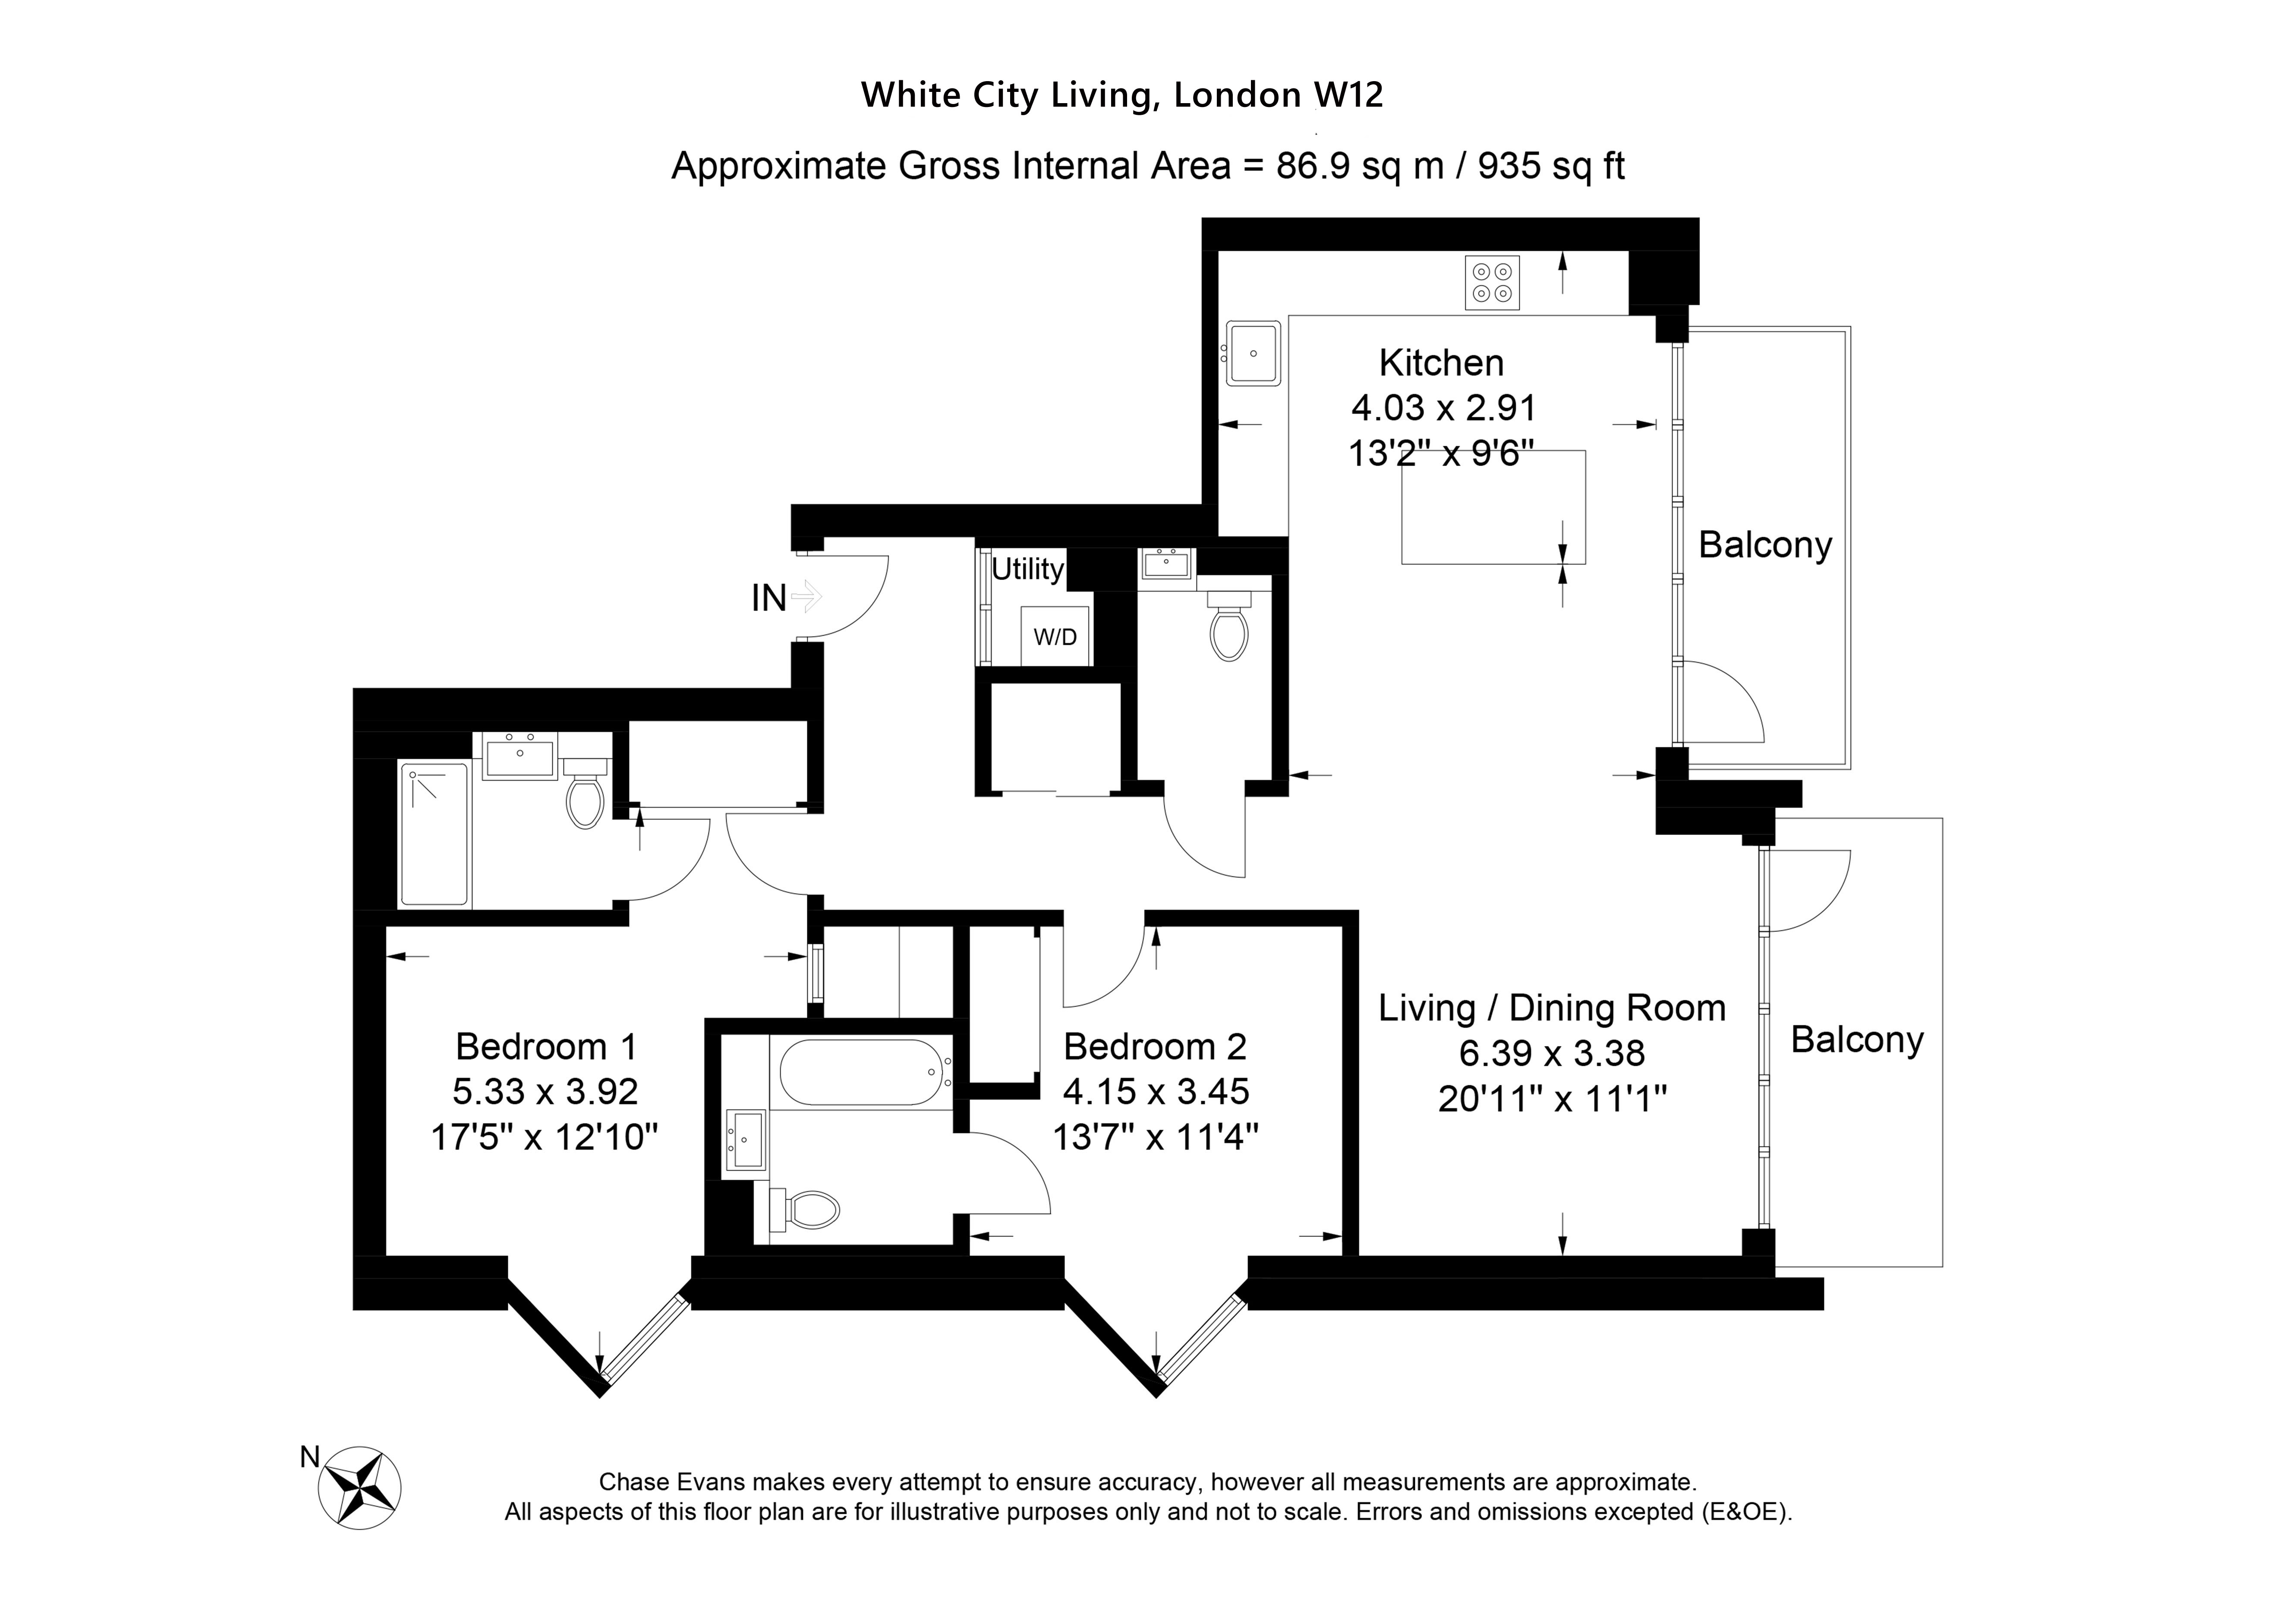 White City Living two bedroom properties